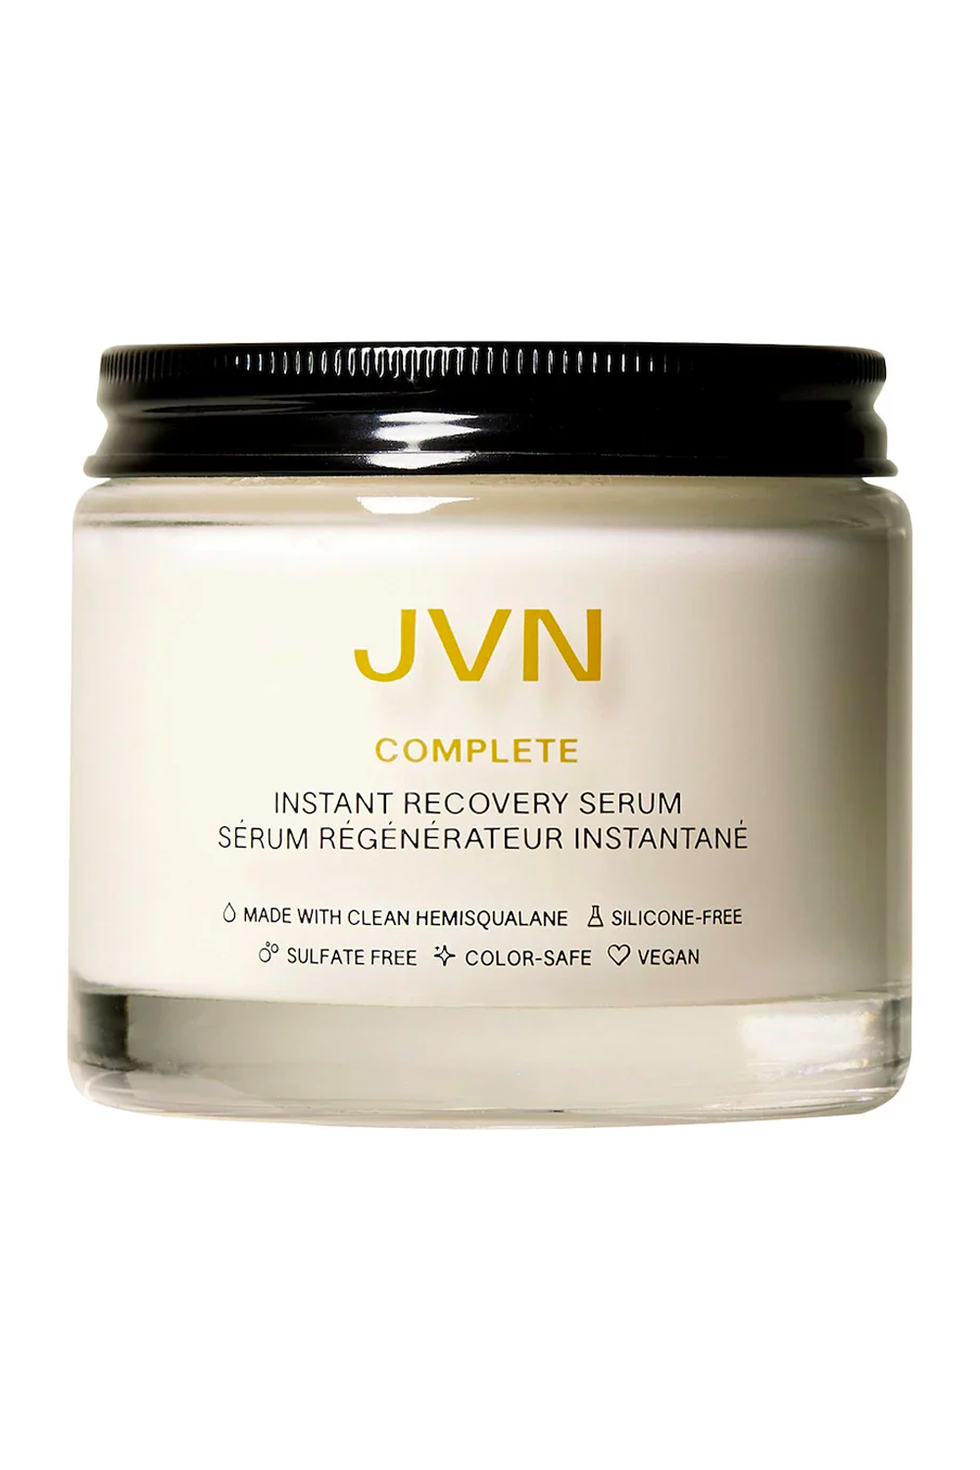 JVN Complete Instant Recovery Leave-In Serum